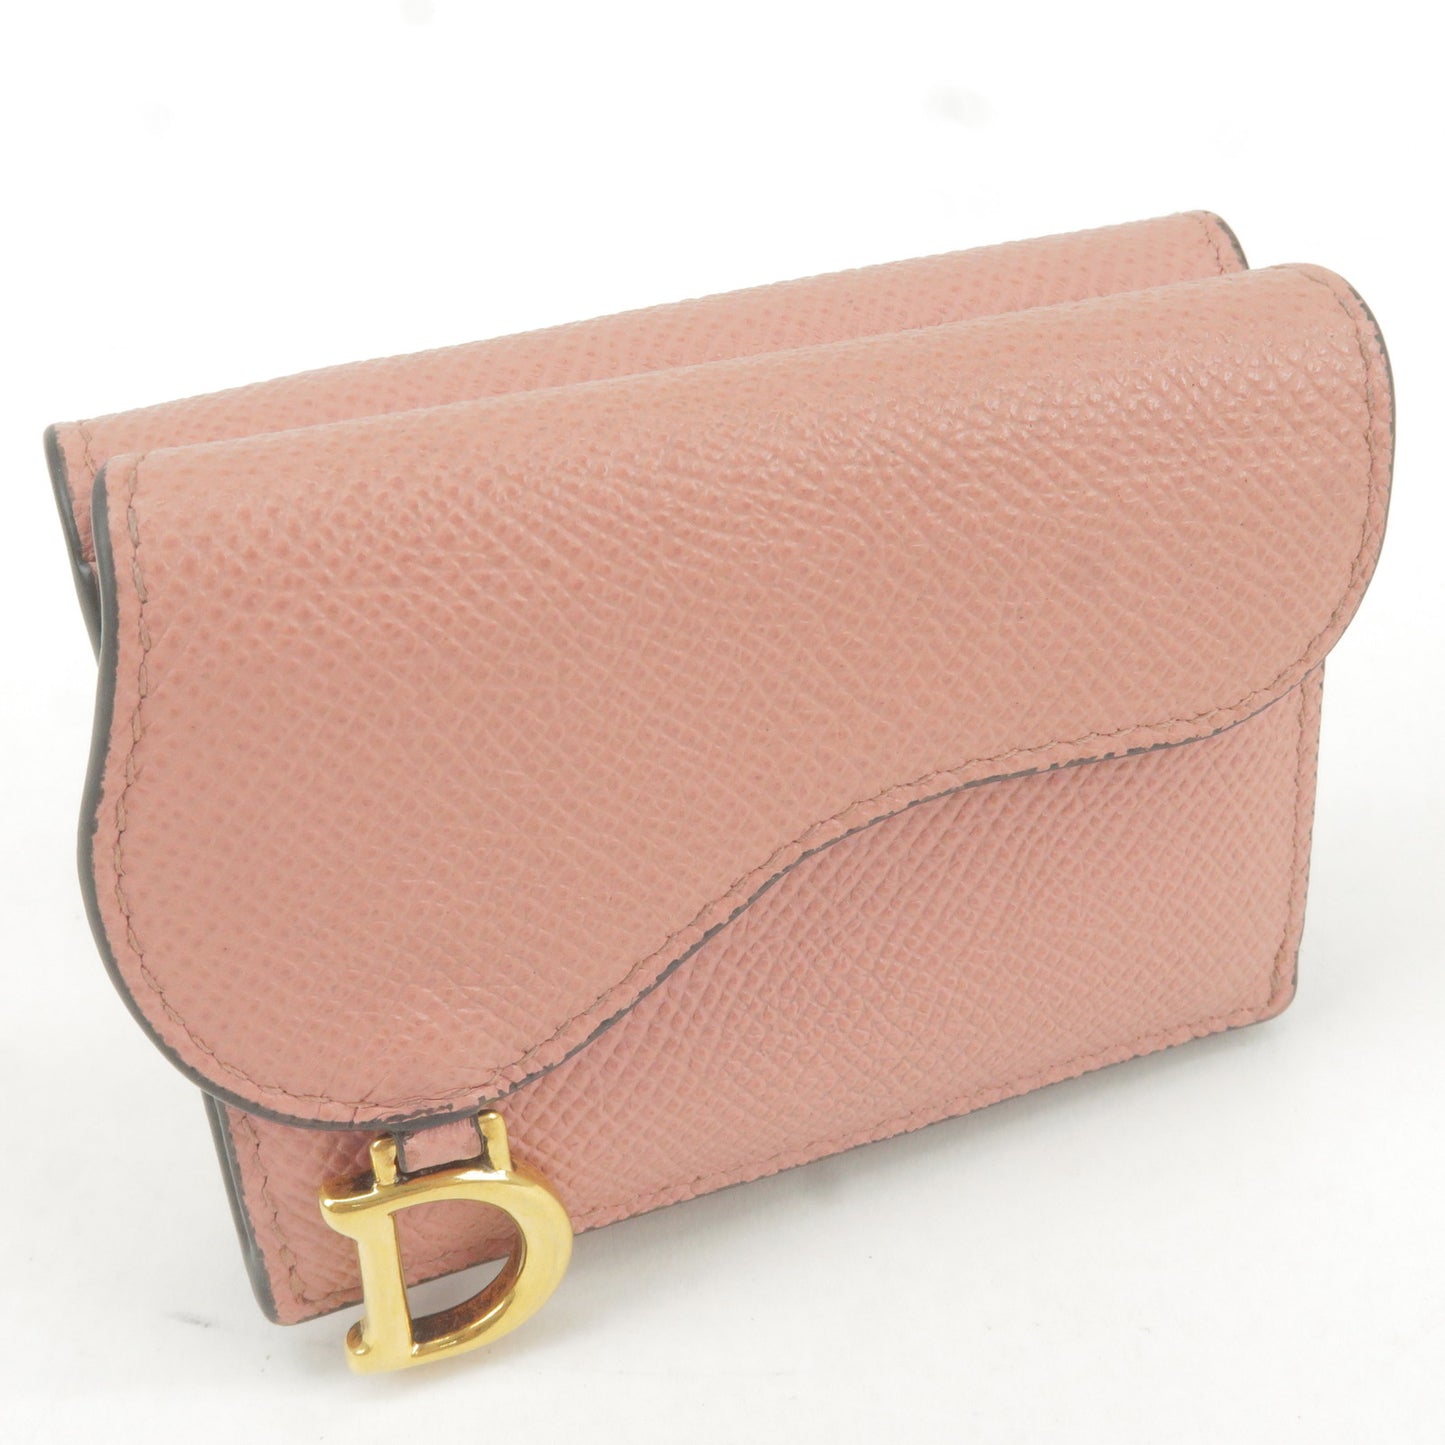 Christian Dior Leather Saddle Compact Trifold Wallet Pink